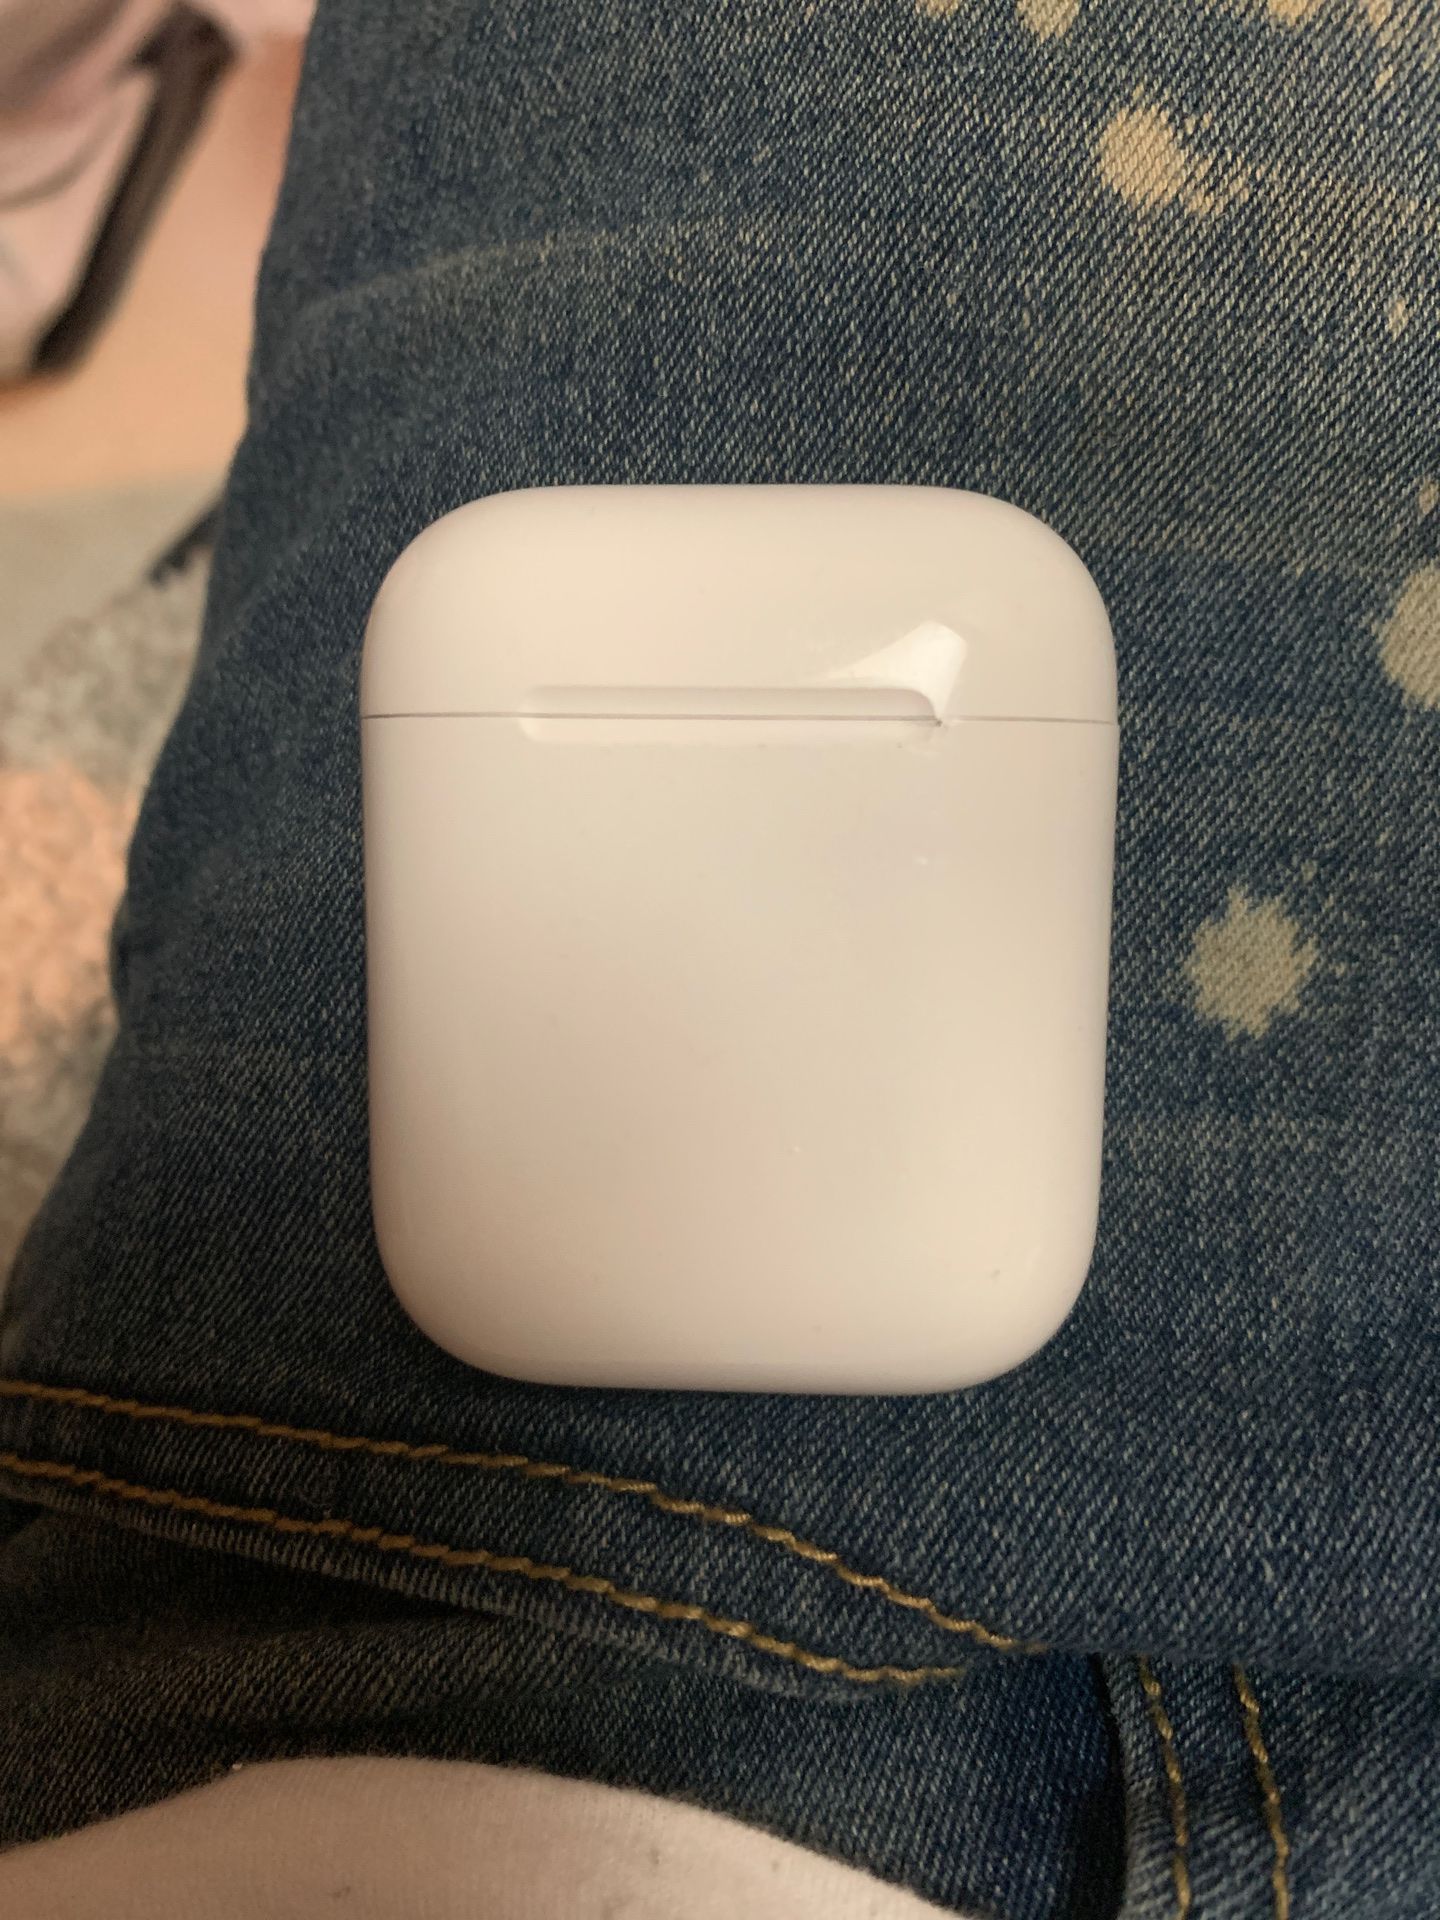 AirPod charging case only